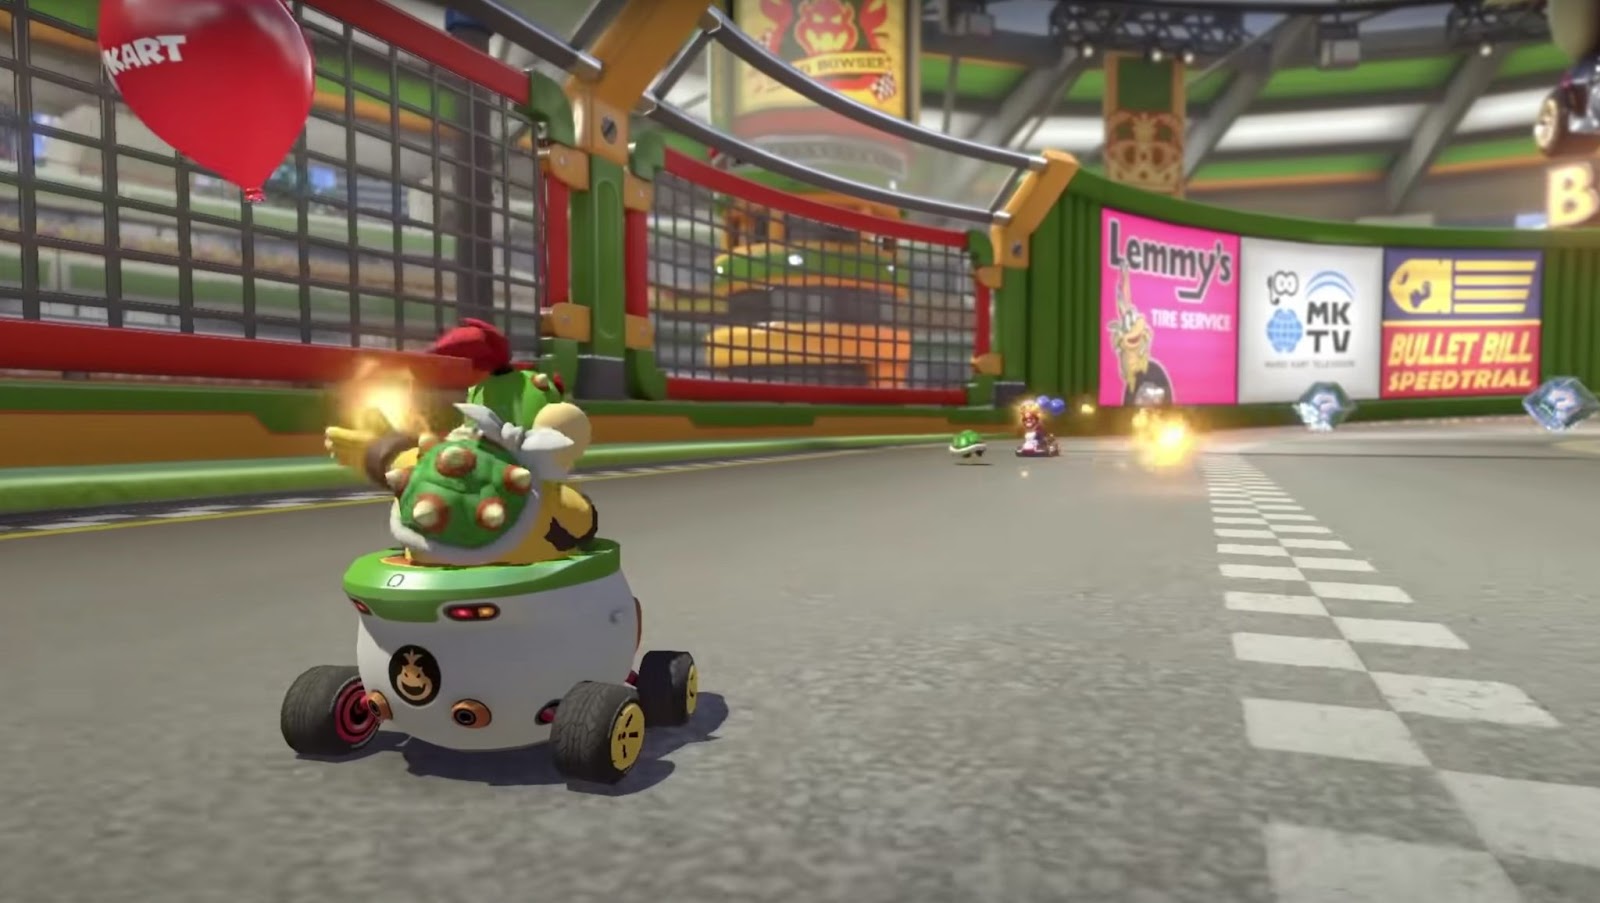 Where Can You Find The Golden Kart In Mario Kart Deluxe